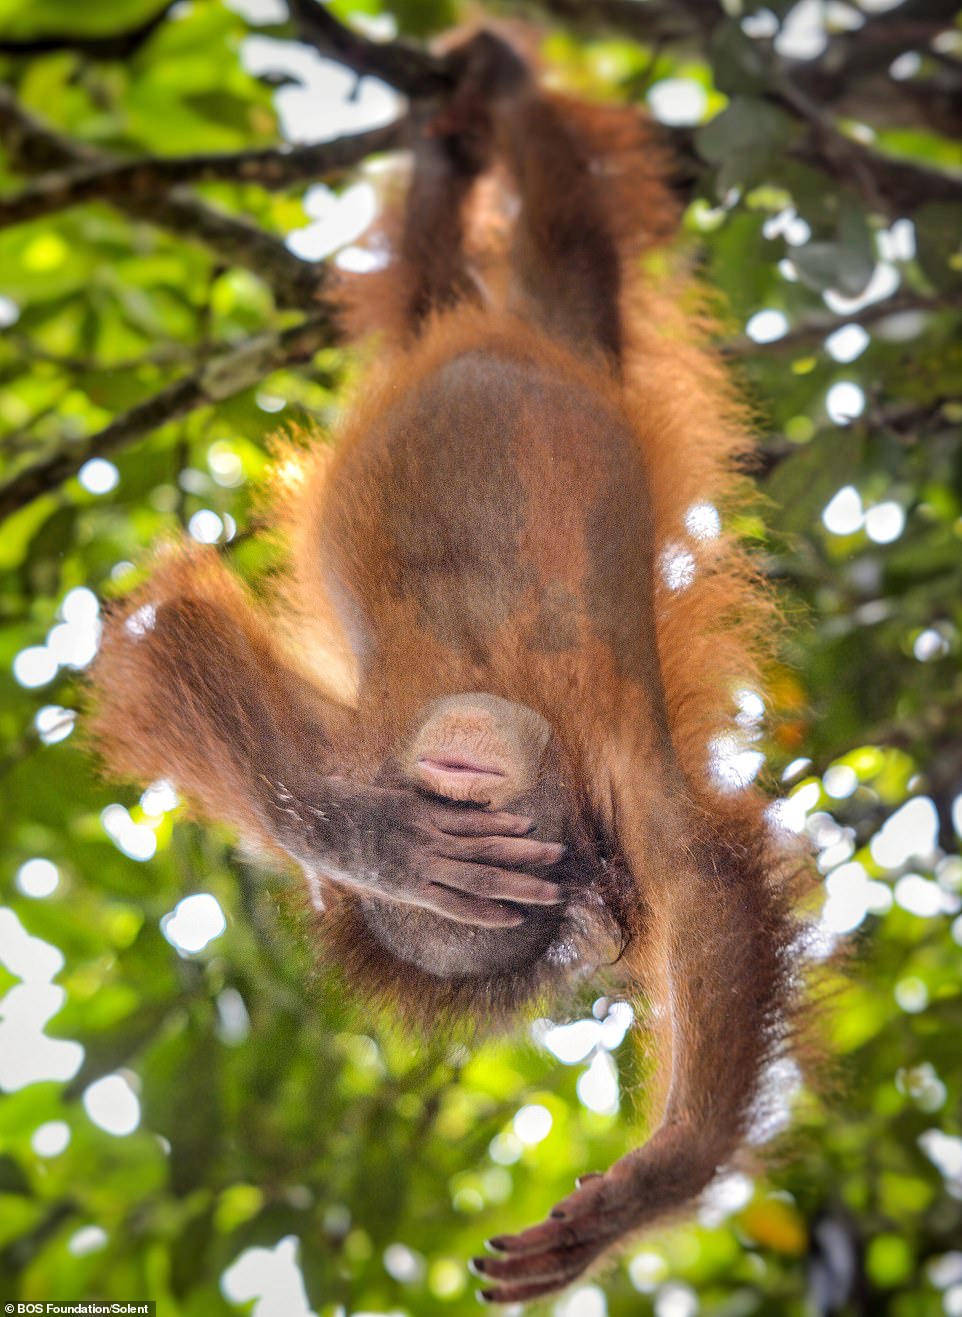 An orangutan hanging from a tree while covering his face at the BOS Foundation's Nyaru Menteng Rehabilitation Center